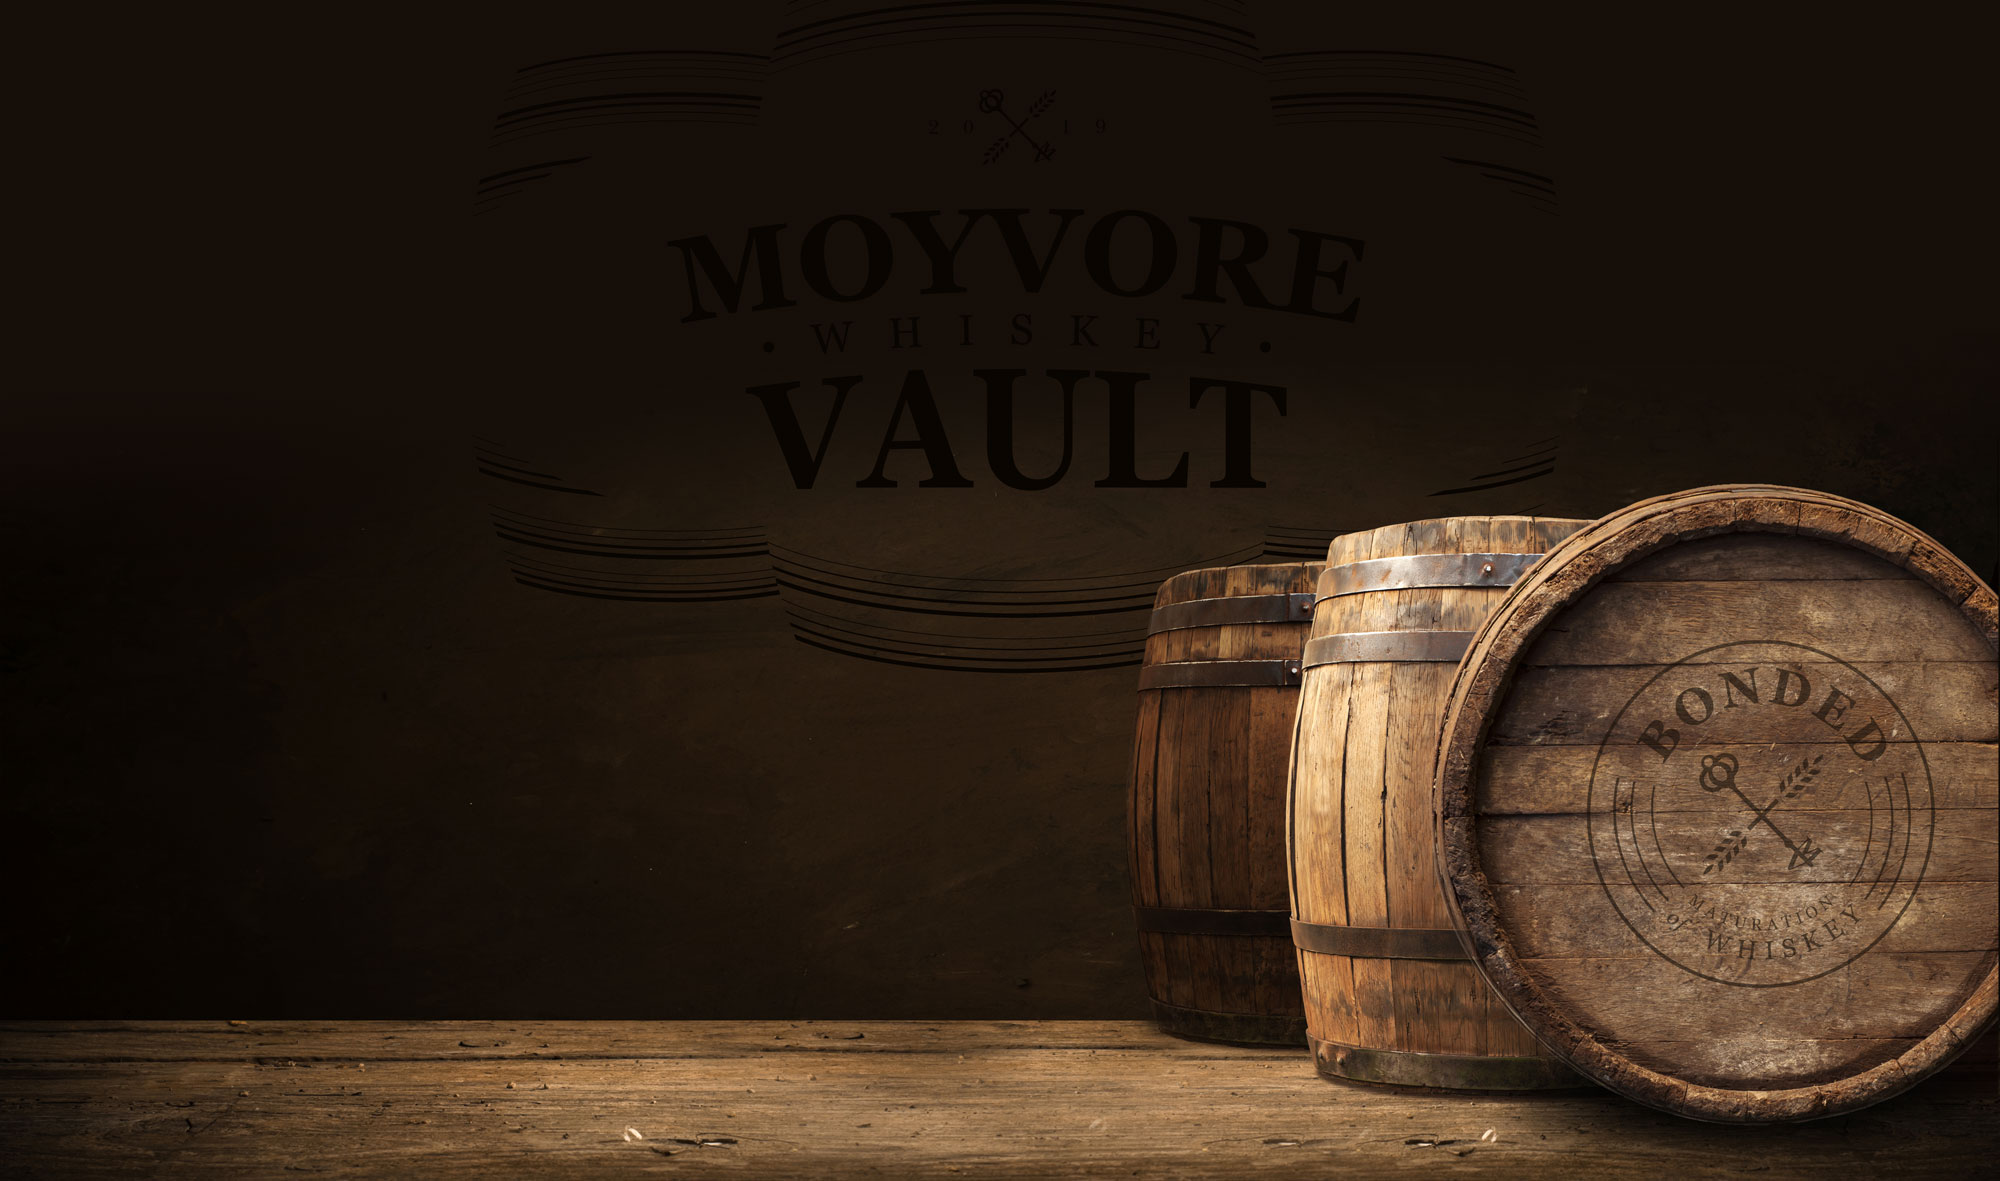 Moyvore Whiskey Vault launch it's new Brand & Website